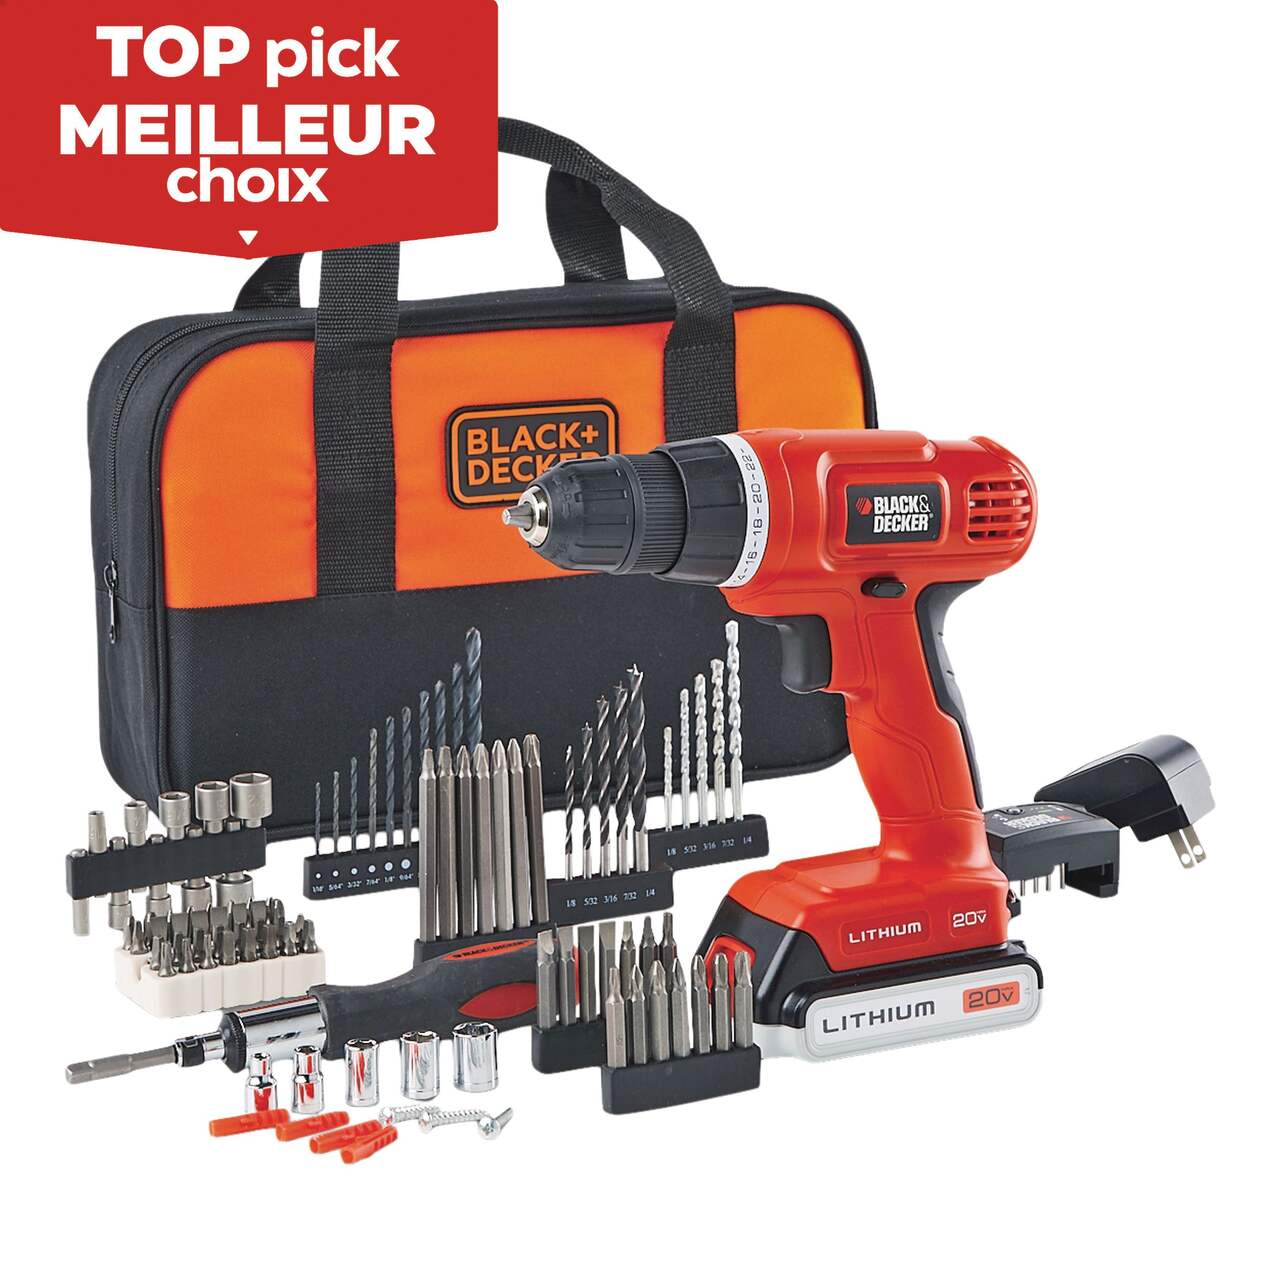 https://media-www.canadiantire.ca/product/fixing/tools/portable-power-tools/0543199/b-d-20v-li-ion-drill-with-100pc-accessory-case-8136c948-7ac7-4225-a59f-94af05065647-jpgrendition.jpg?imdensity=1&imwidth=640&impolicy=mZoom